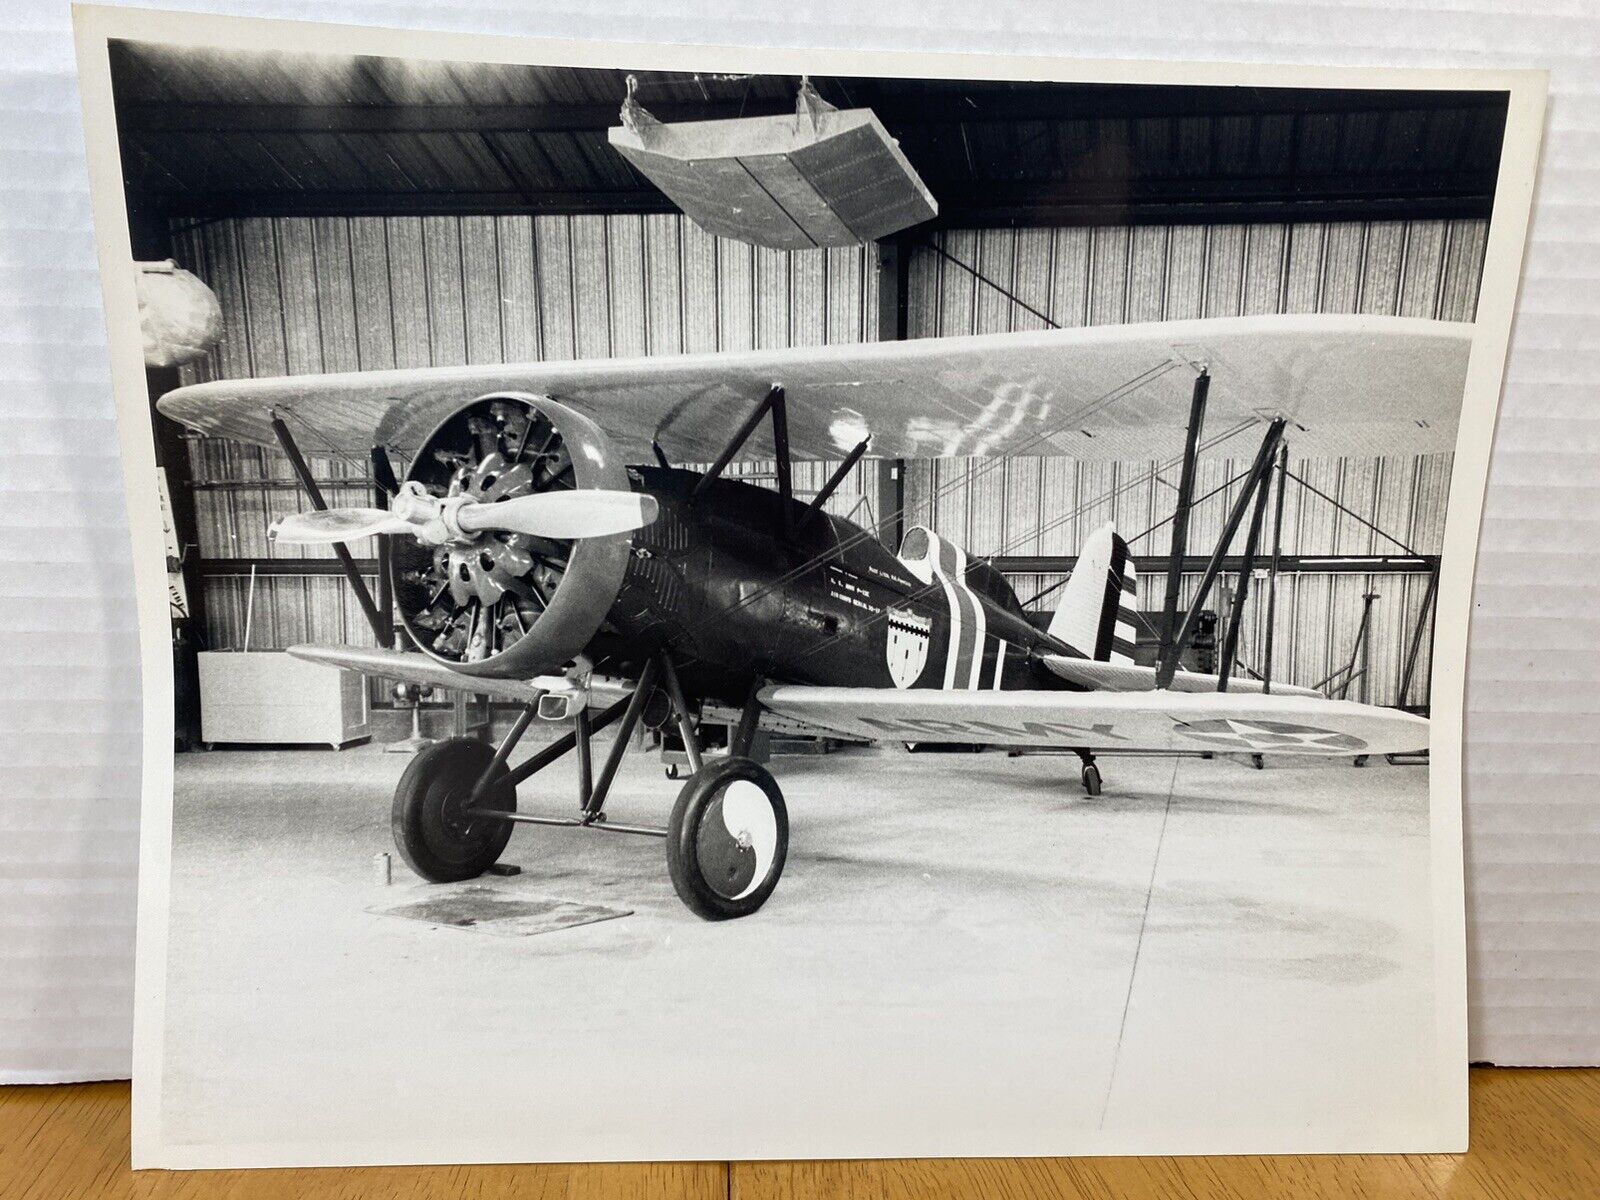 Boeing USAAC P-12 American Pursuit Aircraft